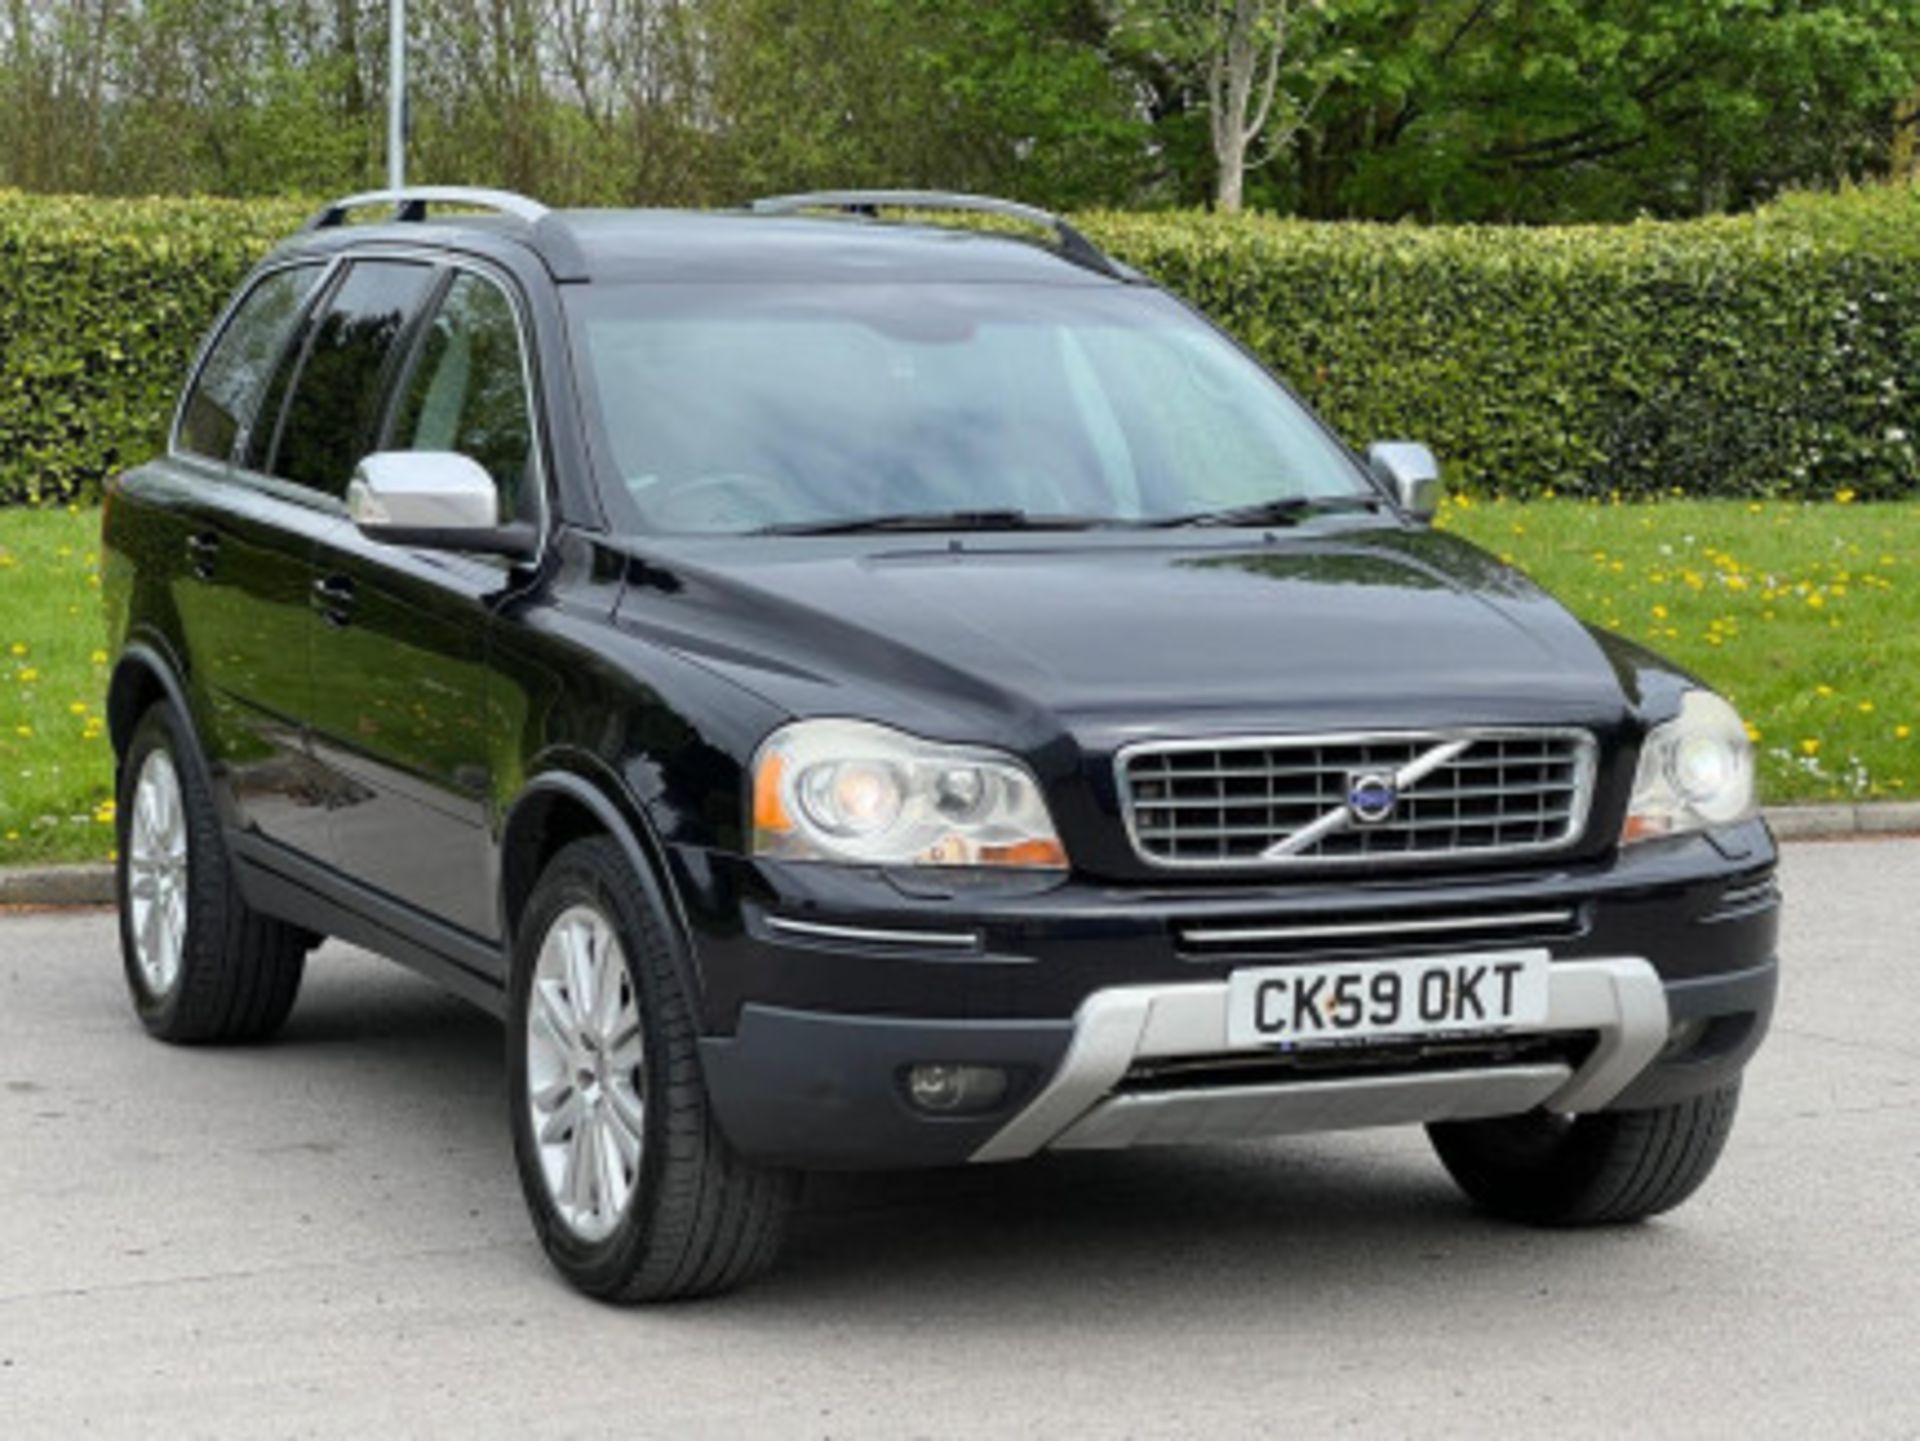 VOLVO XC90 2.4 D5 EXECUTIVE GEARTRONIC AWD, 5DR >>--NO VAT ON HAMMER--<< - Image 79 of 136